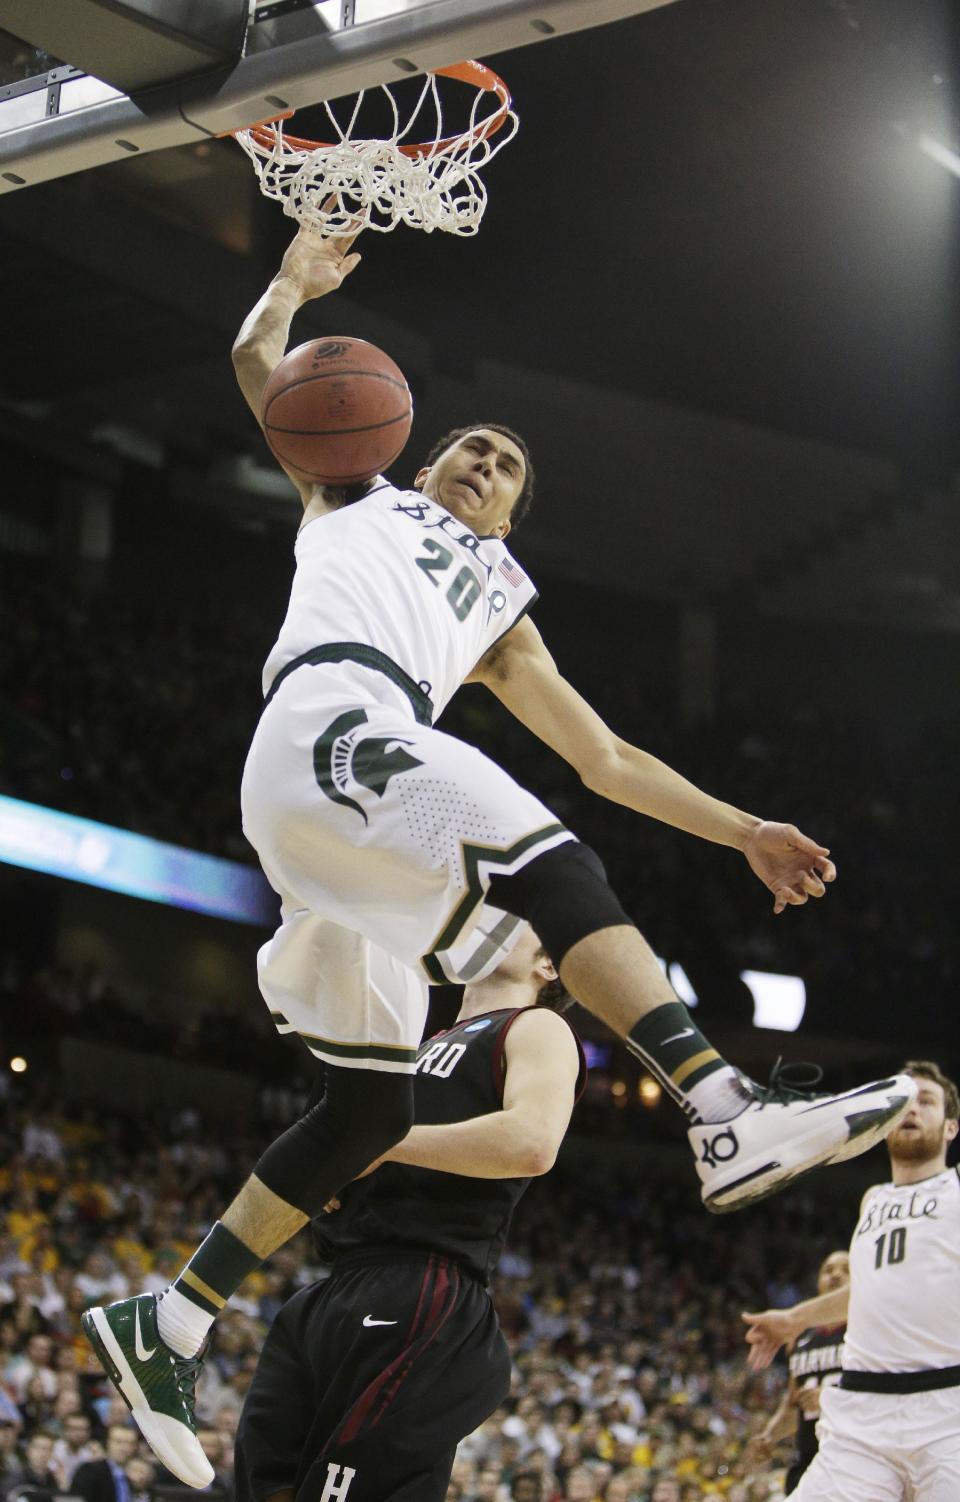 Michigan State’s Travis Trice (20) dunks in the first half during the third-round game of the NCAA men's college basketball tournament against Harvard in Spokane, Wash., Saturday, March 22, 2014. (AP Photo/Young Kwak)